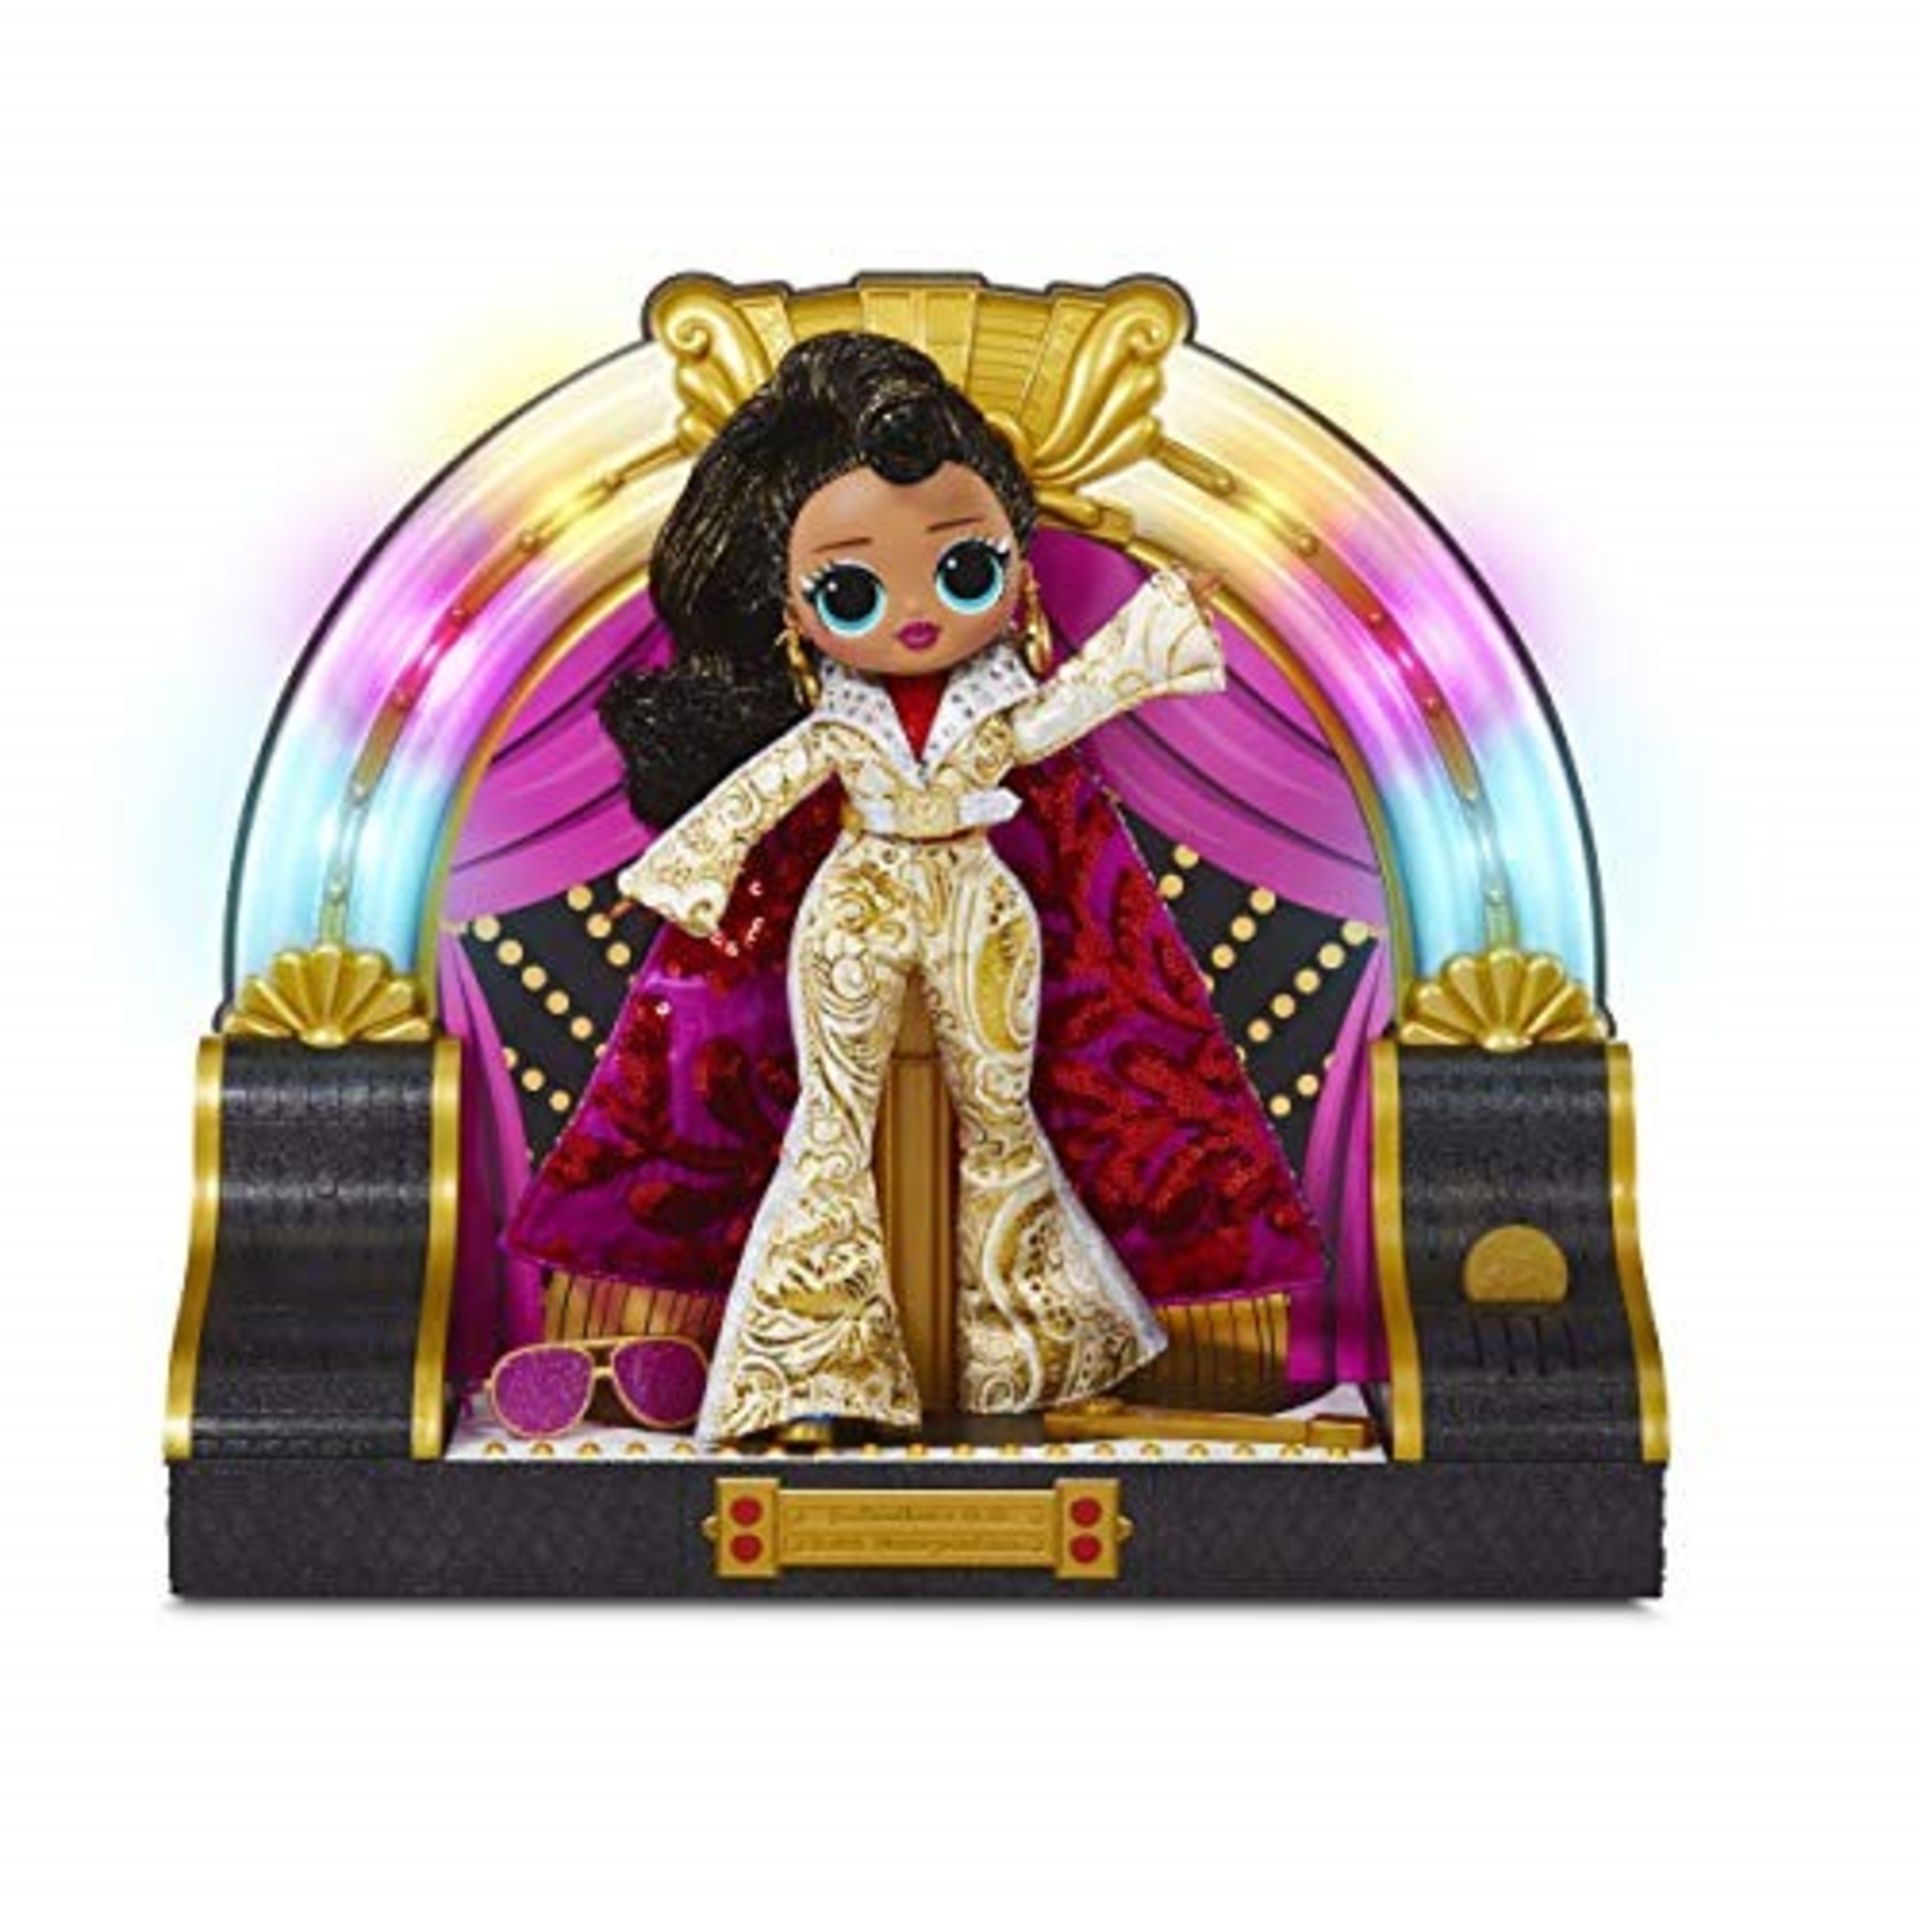 LOL Surprise OMG Remix - Jukebox BB with Music - Fashion Doll and Accessories - 2020 C